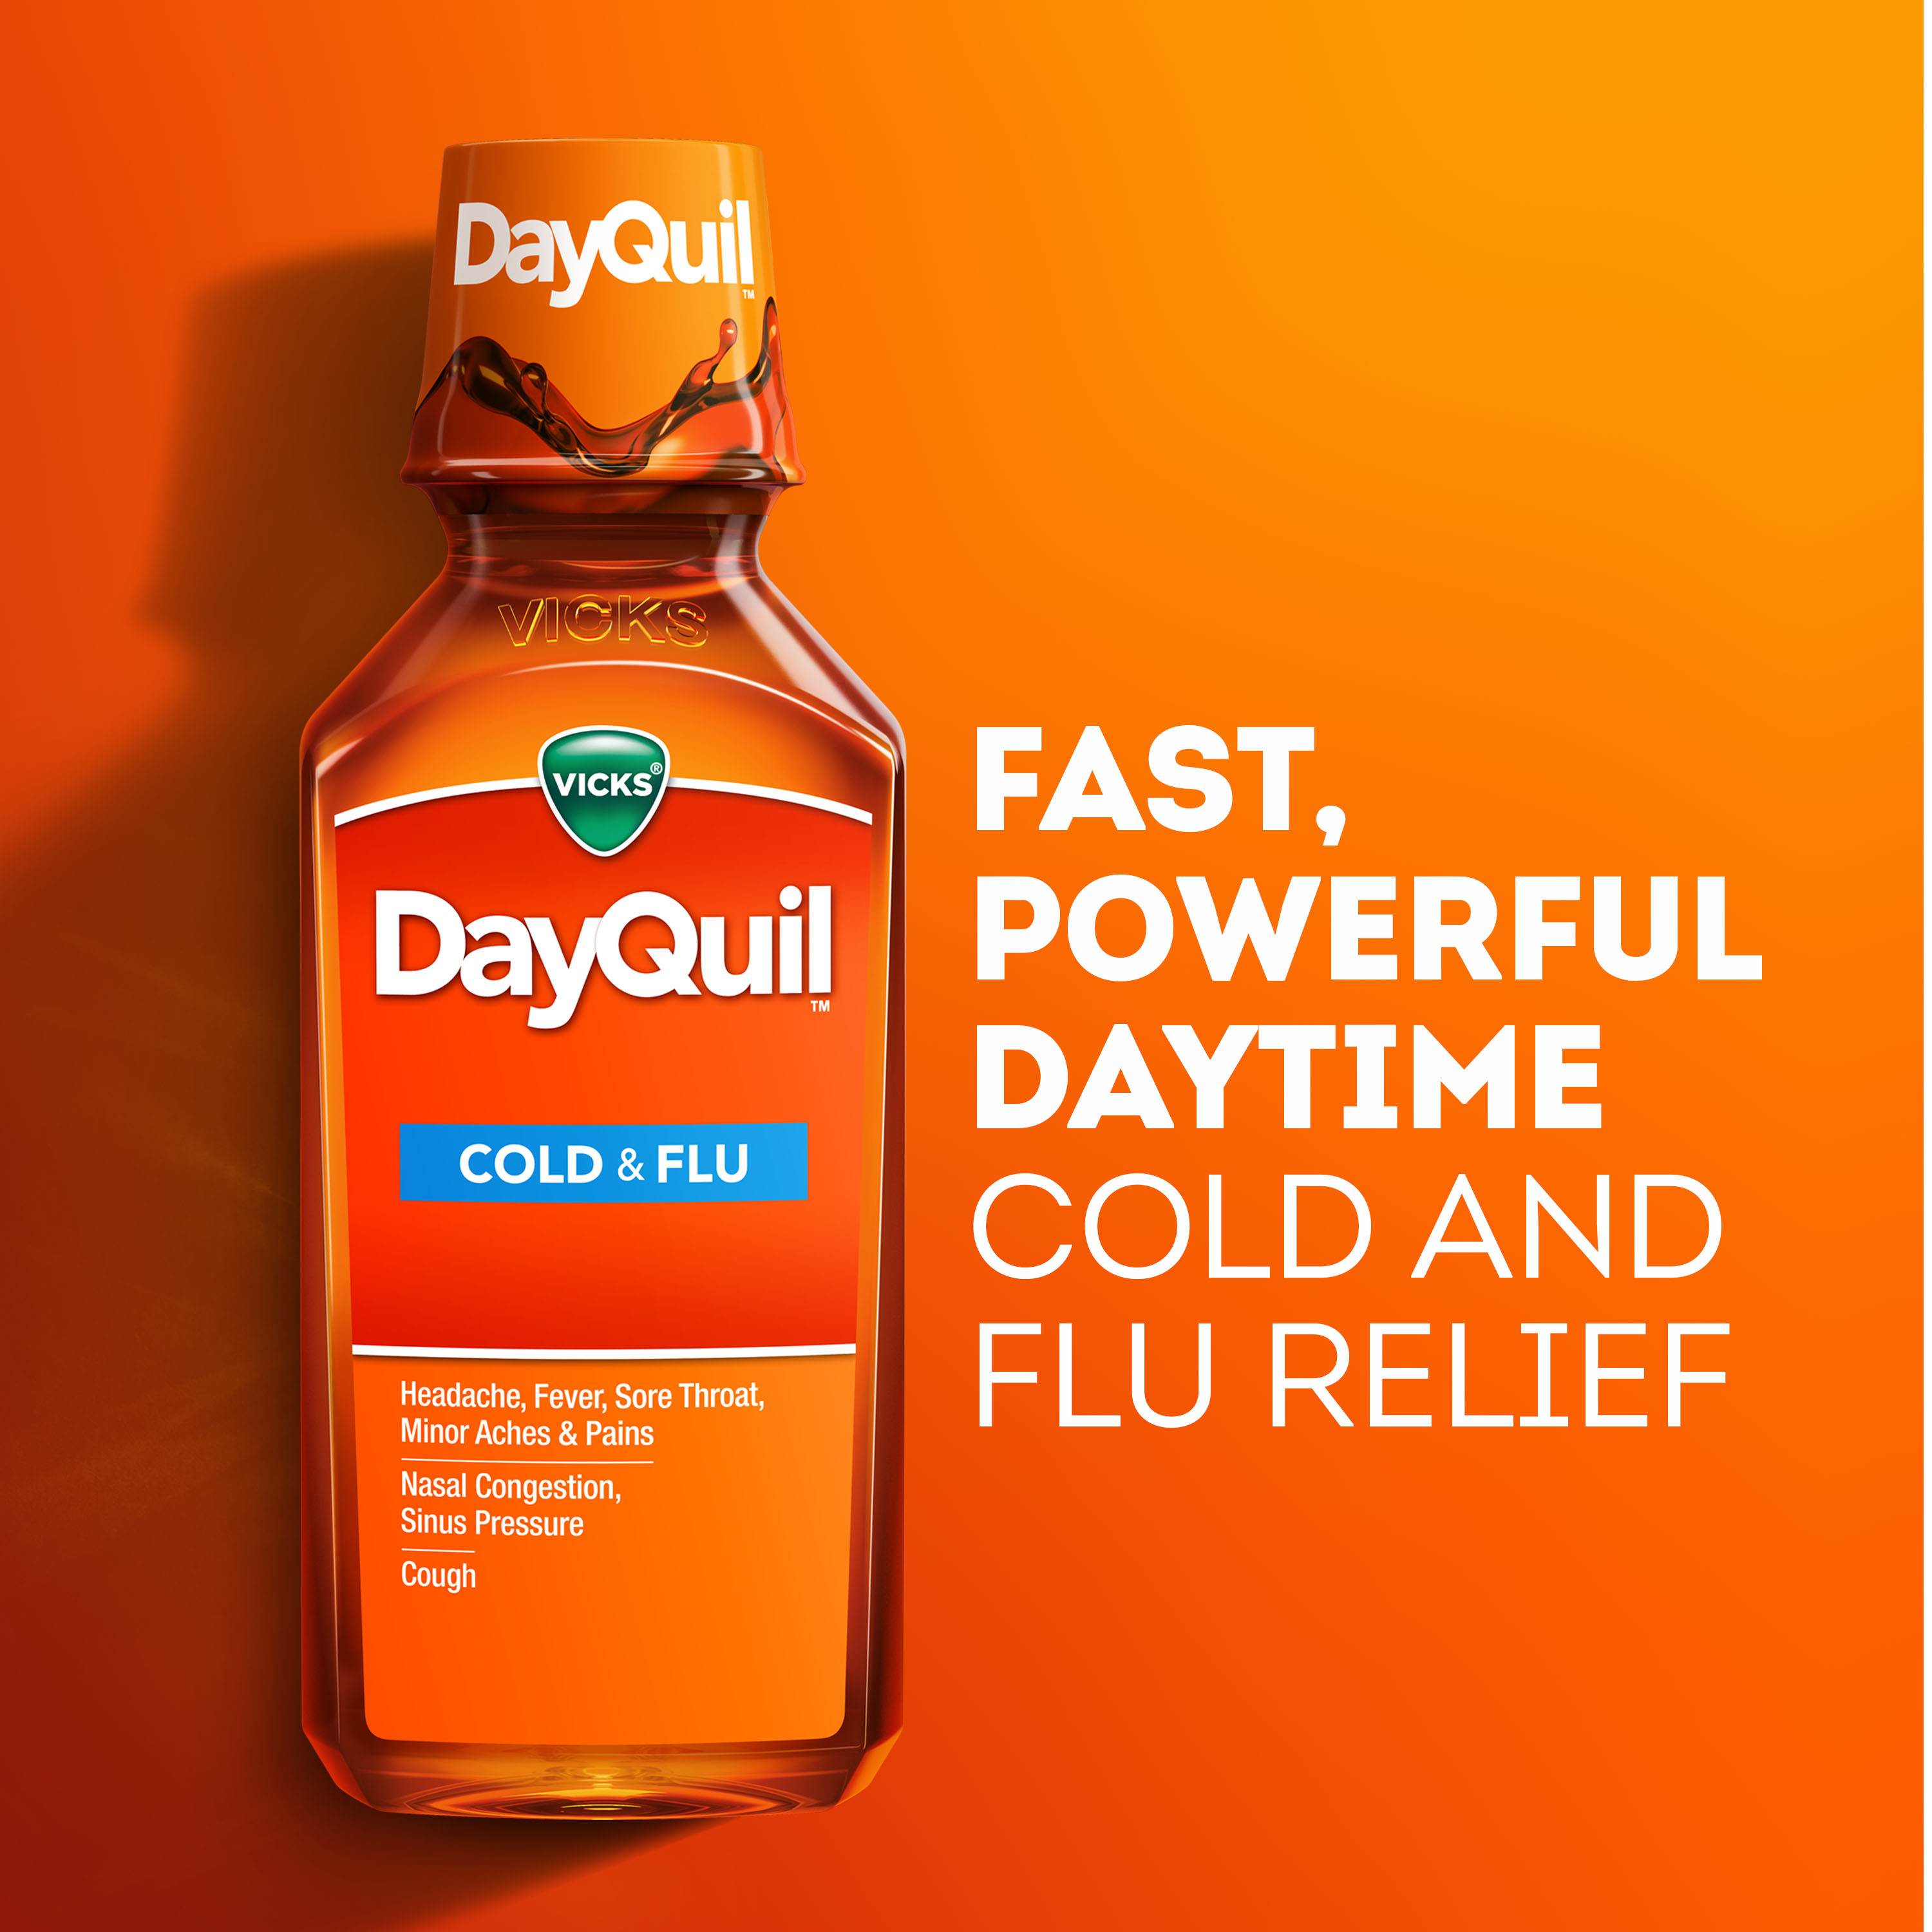 Vicks DayQuil Daytime Cold, Cough and Flu Liquid Medicine, over-the-Counter Medicine, 12 fl. oz. - image 3 of 9